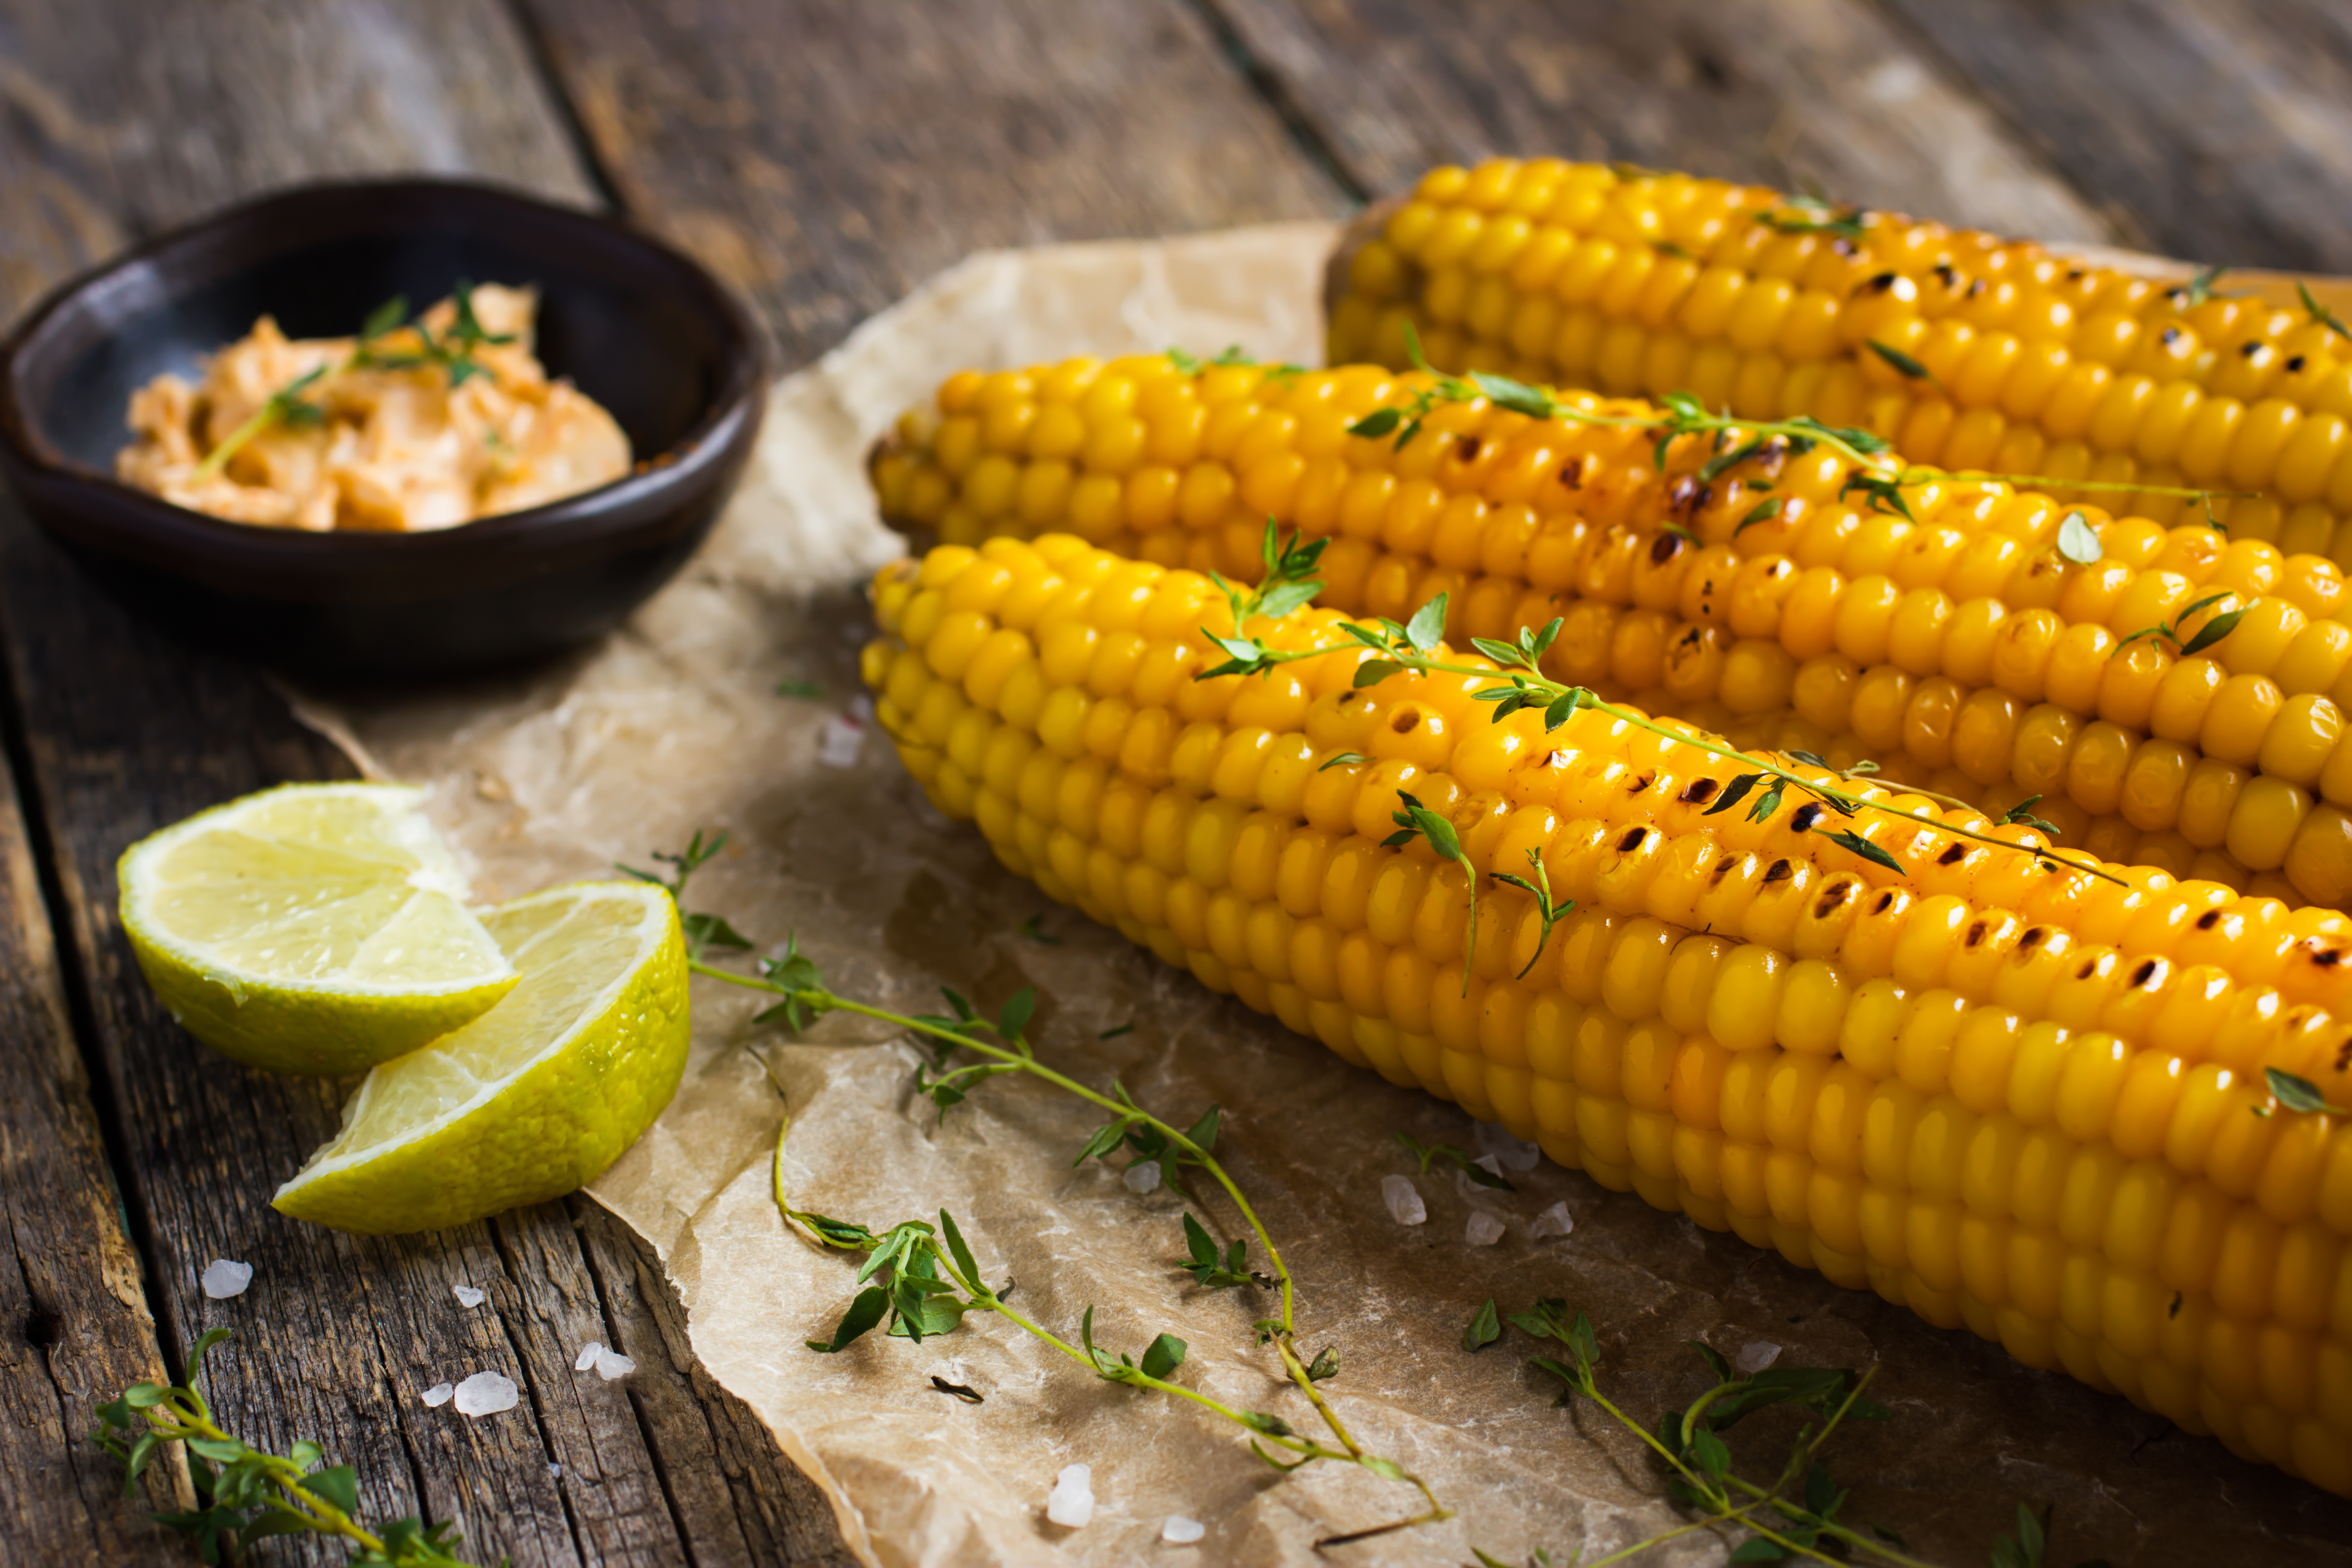 Grilled Brentwood corn with garlic and chili butter.